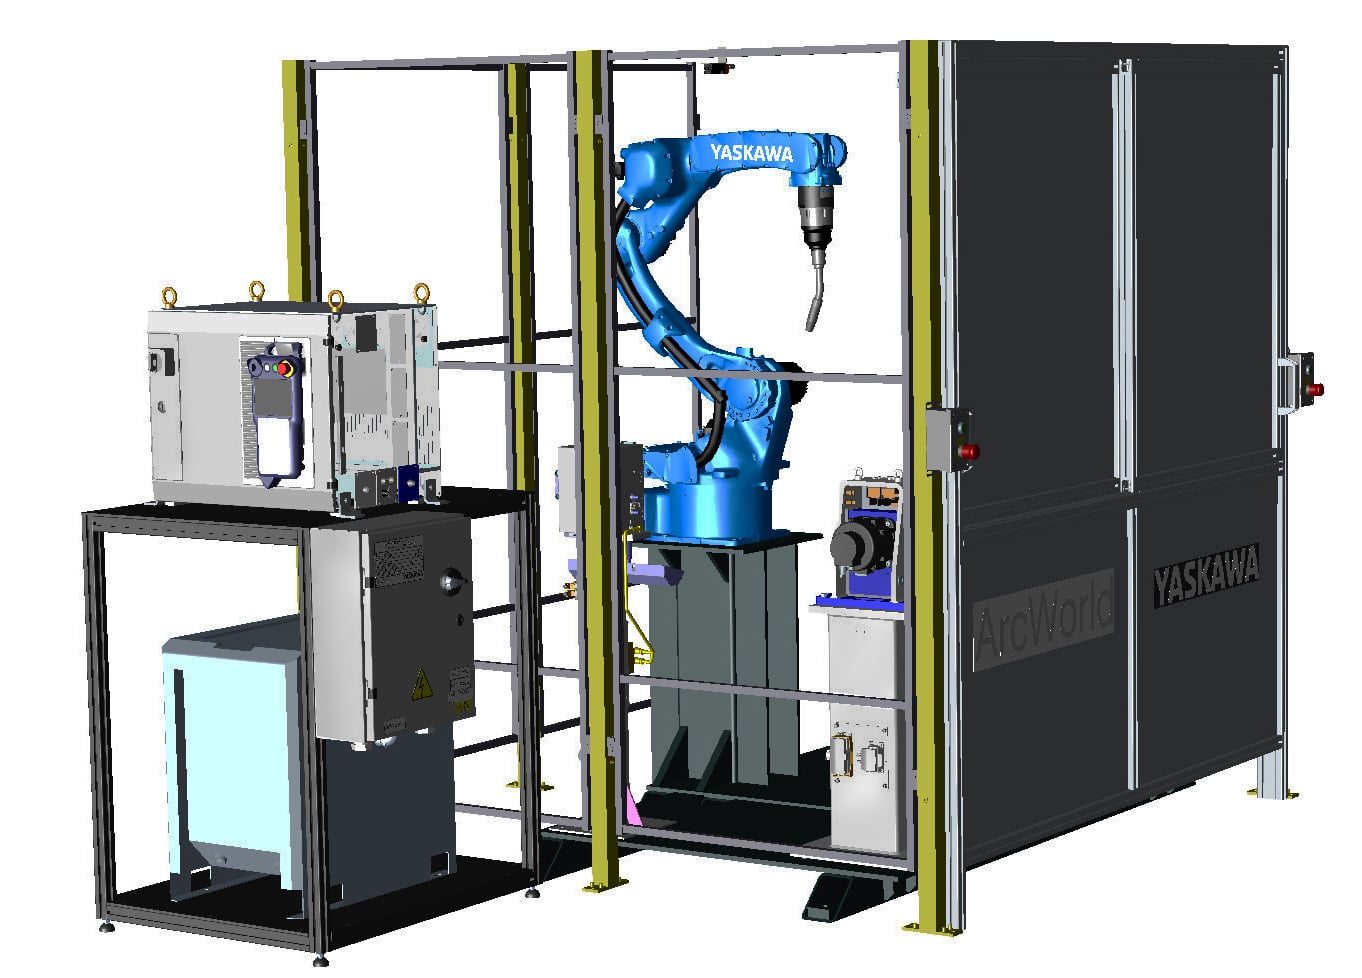 Industrial Robots - an example of a welding cell